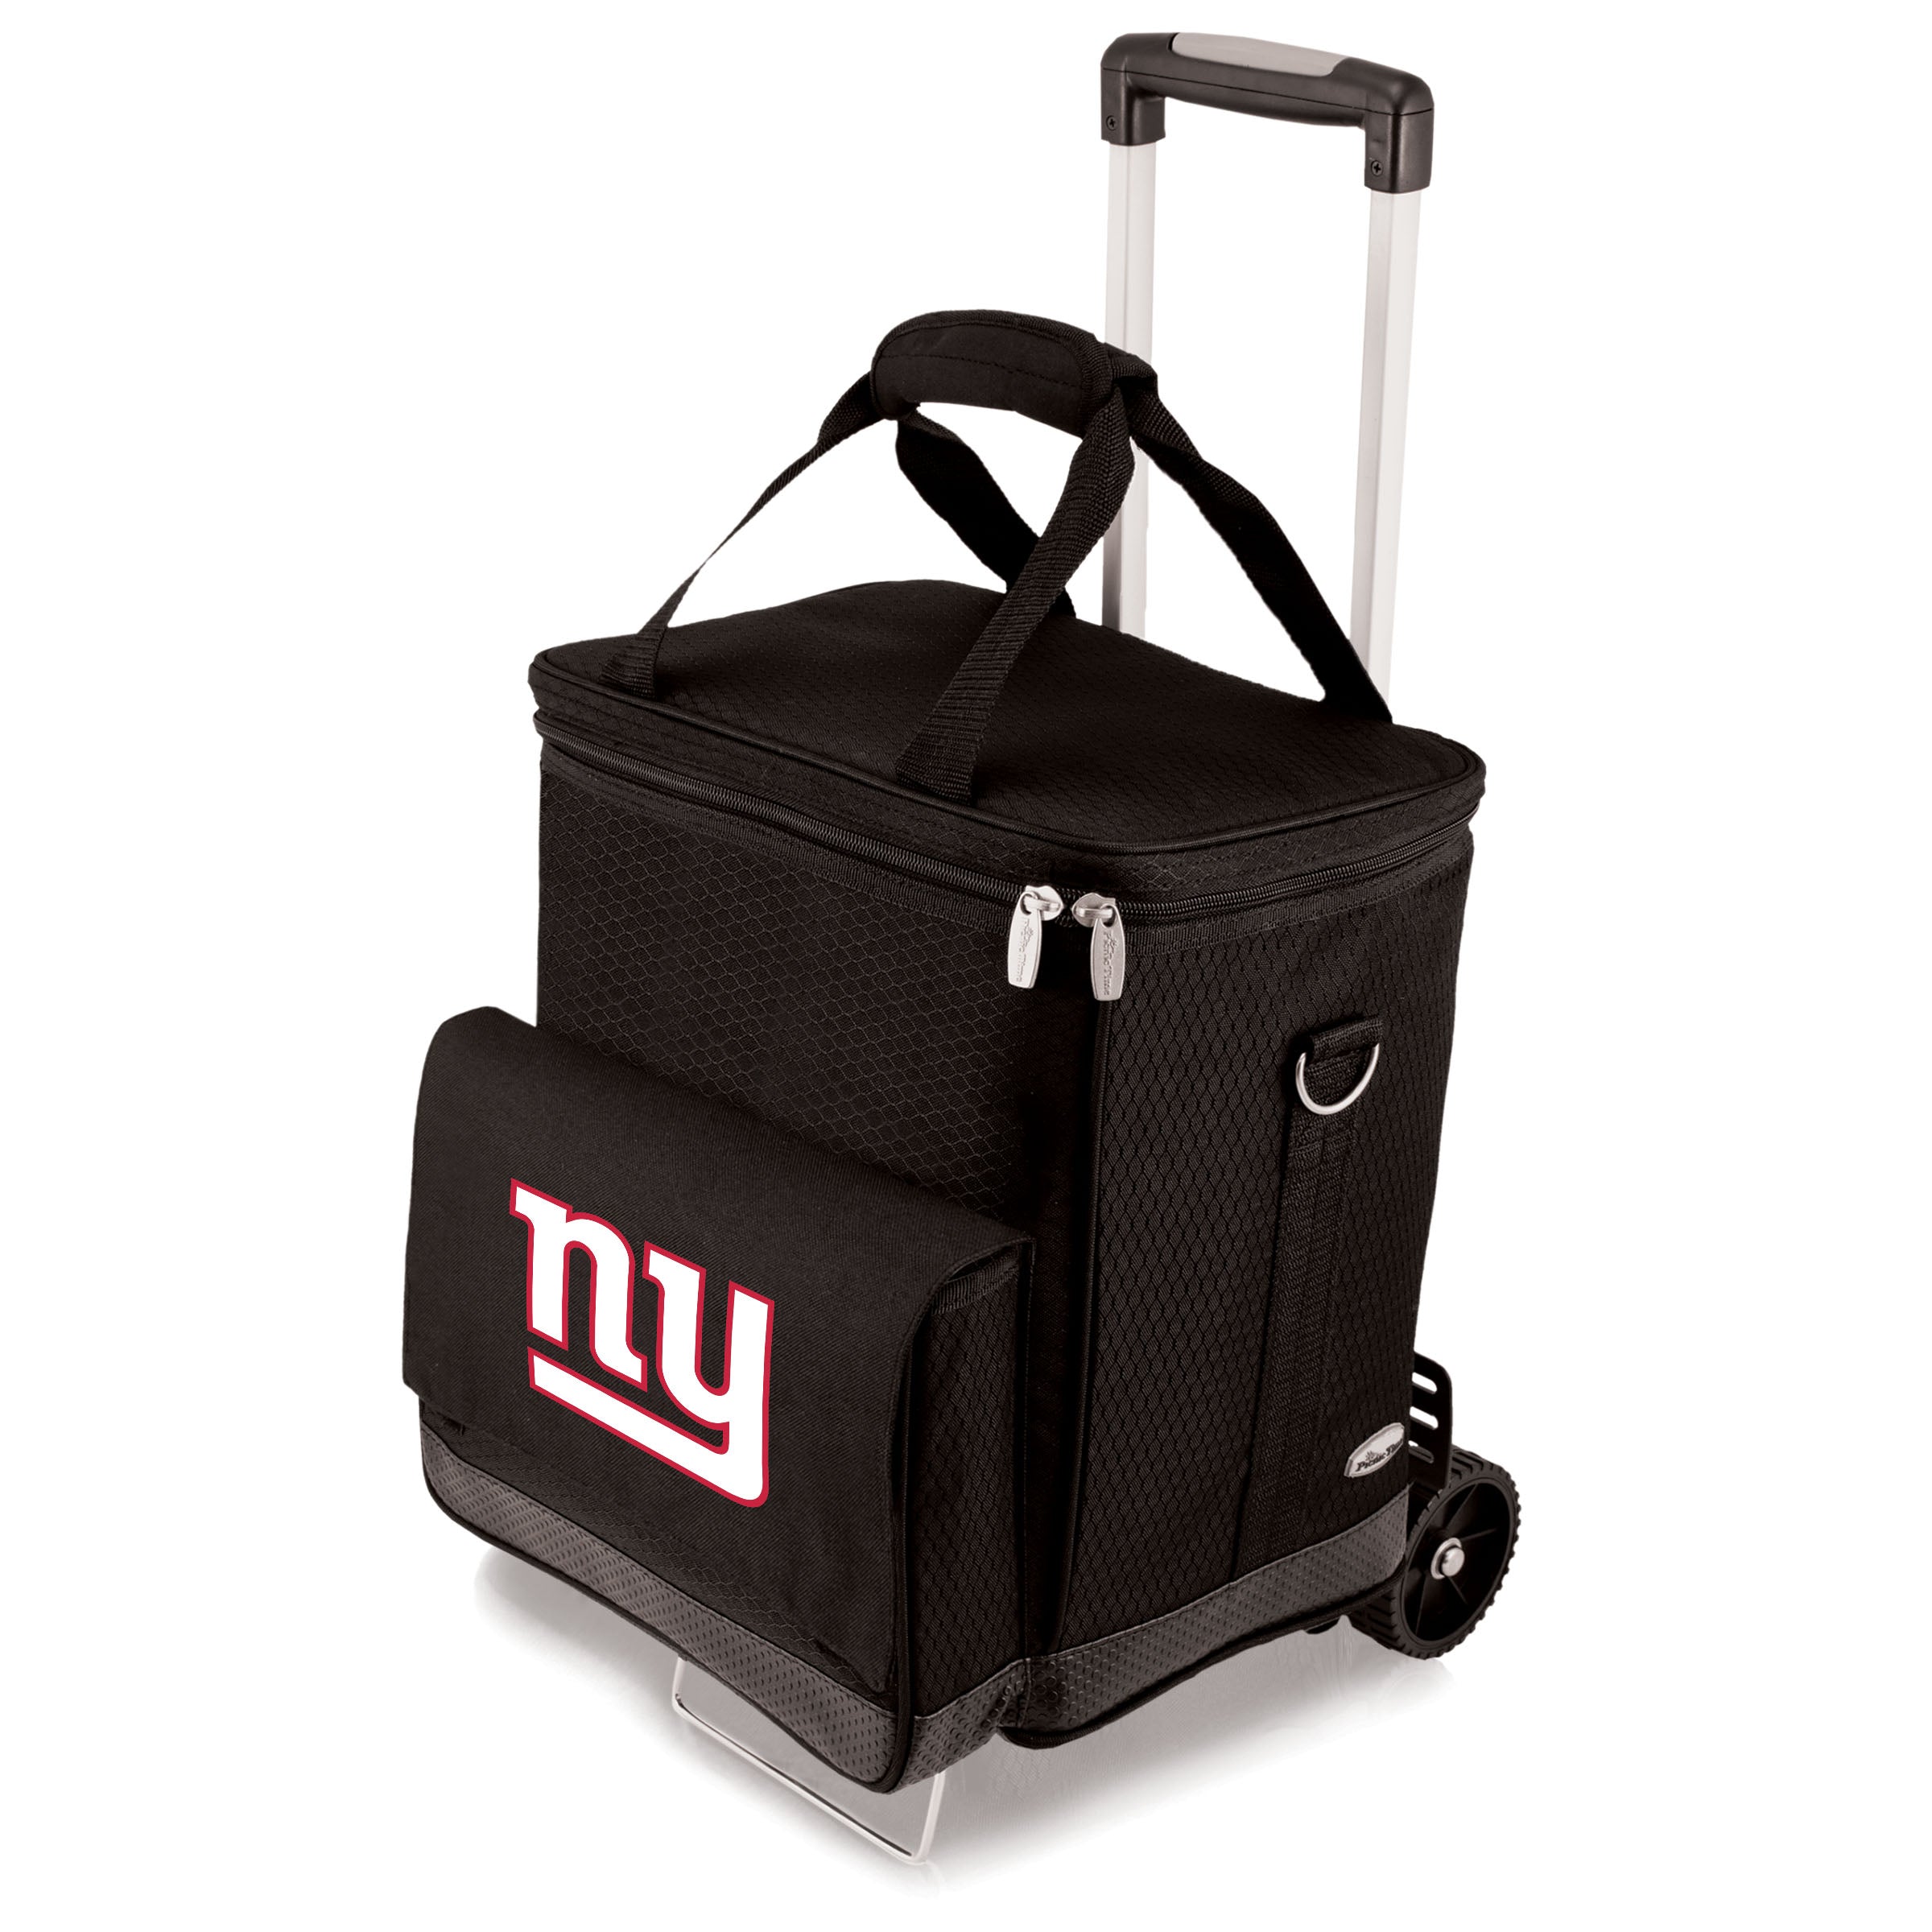 New York Giants - Cellar 6-Bottle Wine Carrier & Cooler Tote with Trolley